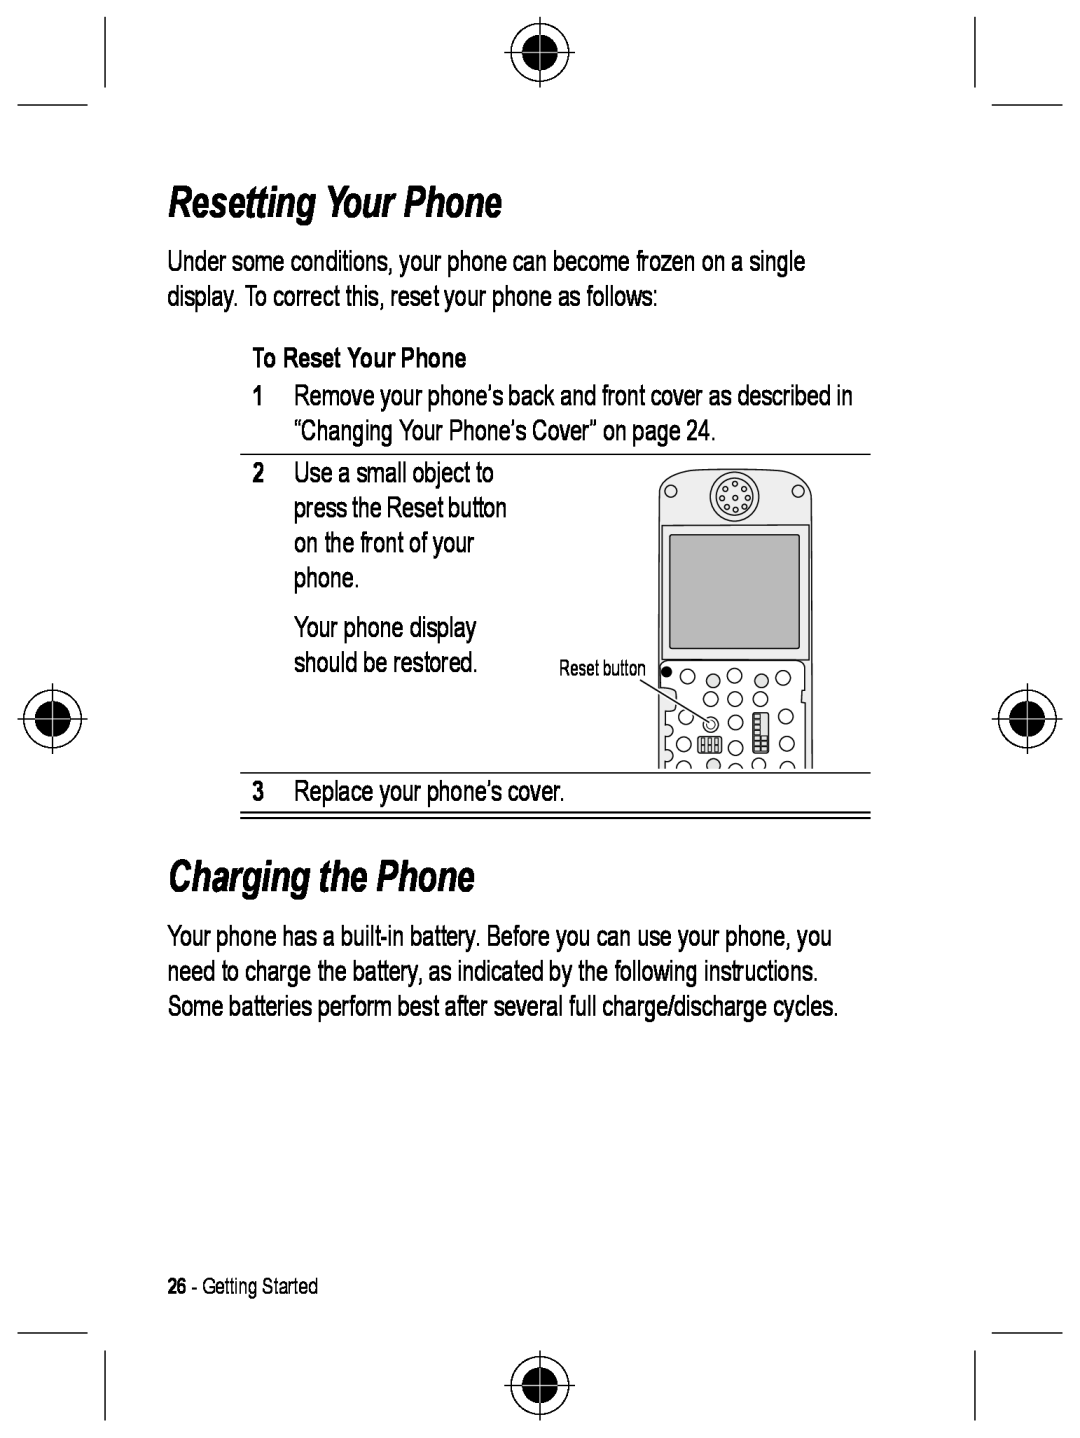 Motorola C330 manual Resetting Your Phone, Charging the Phone, To Reset Your Phone 